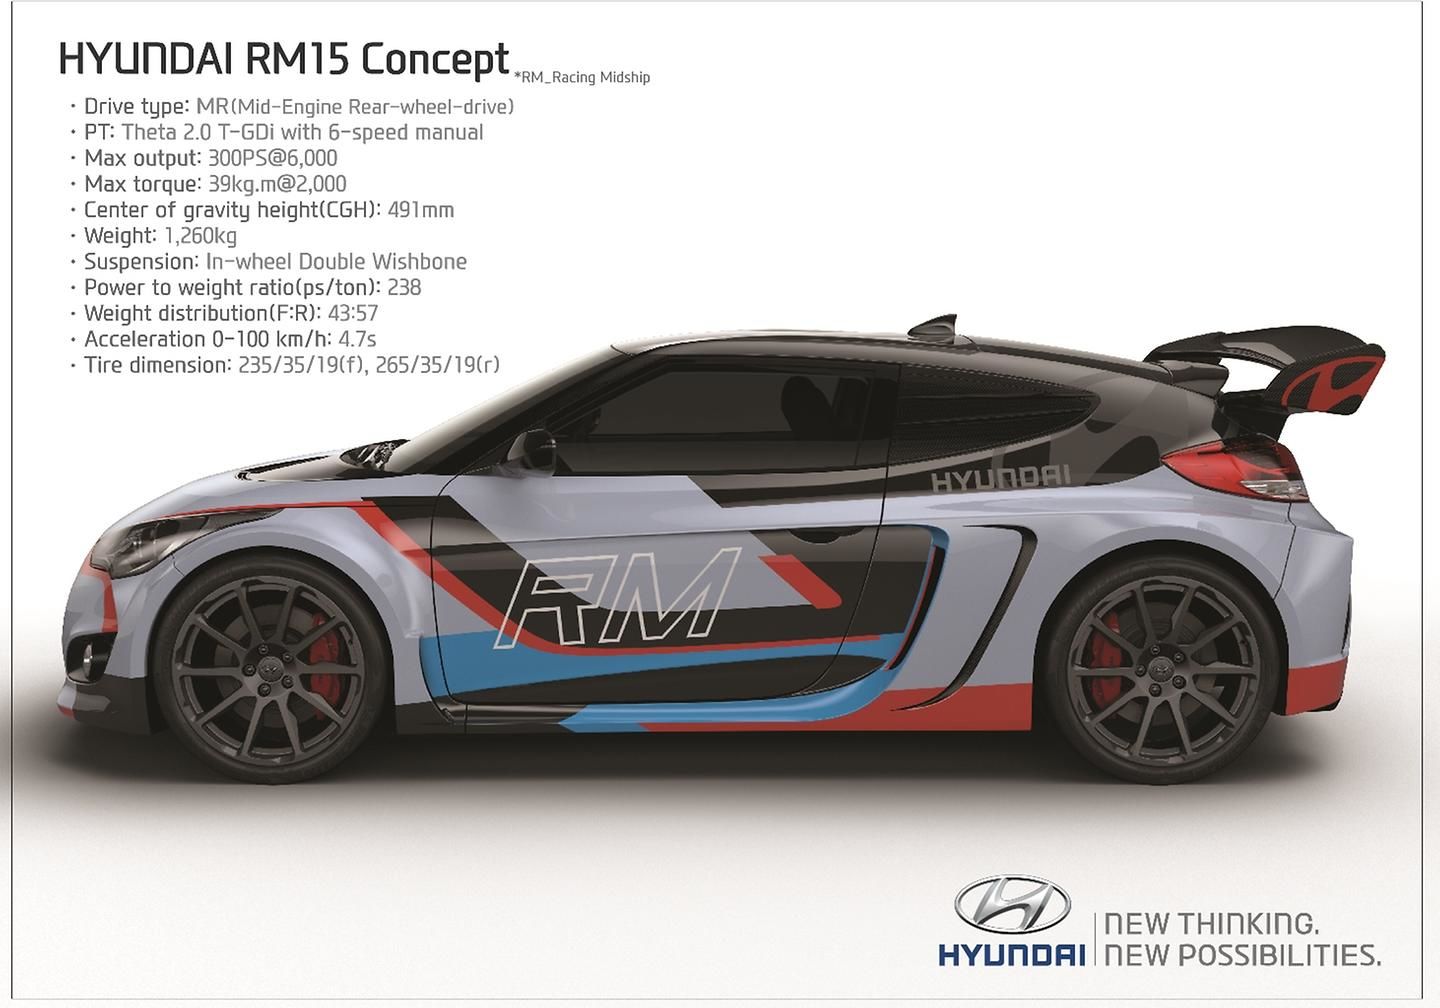 Hyundai Motor's Mid-engined Coupe Concept 'RM15' Revealed at 2015 Seoul Motor Show